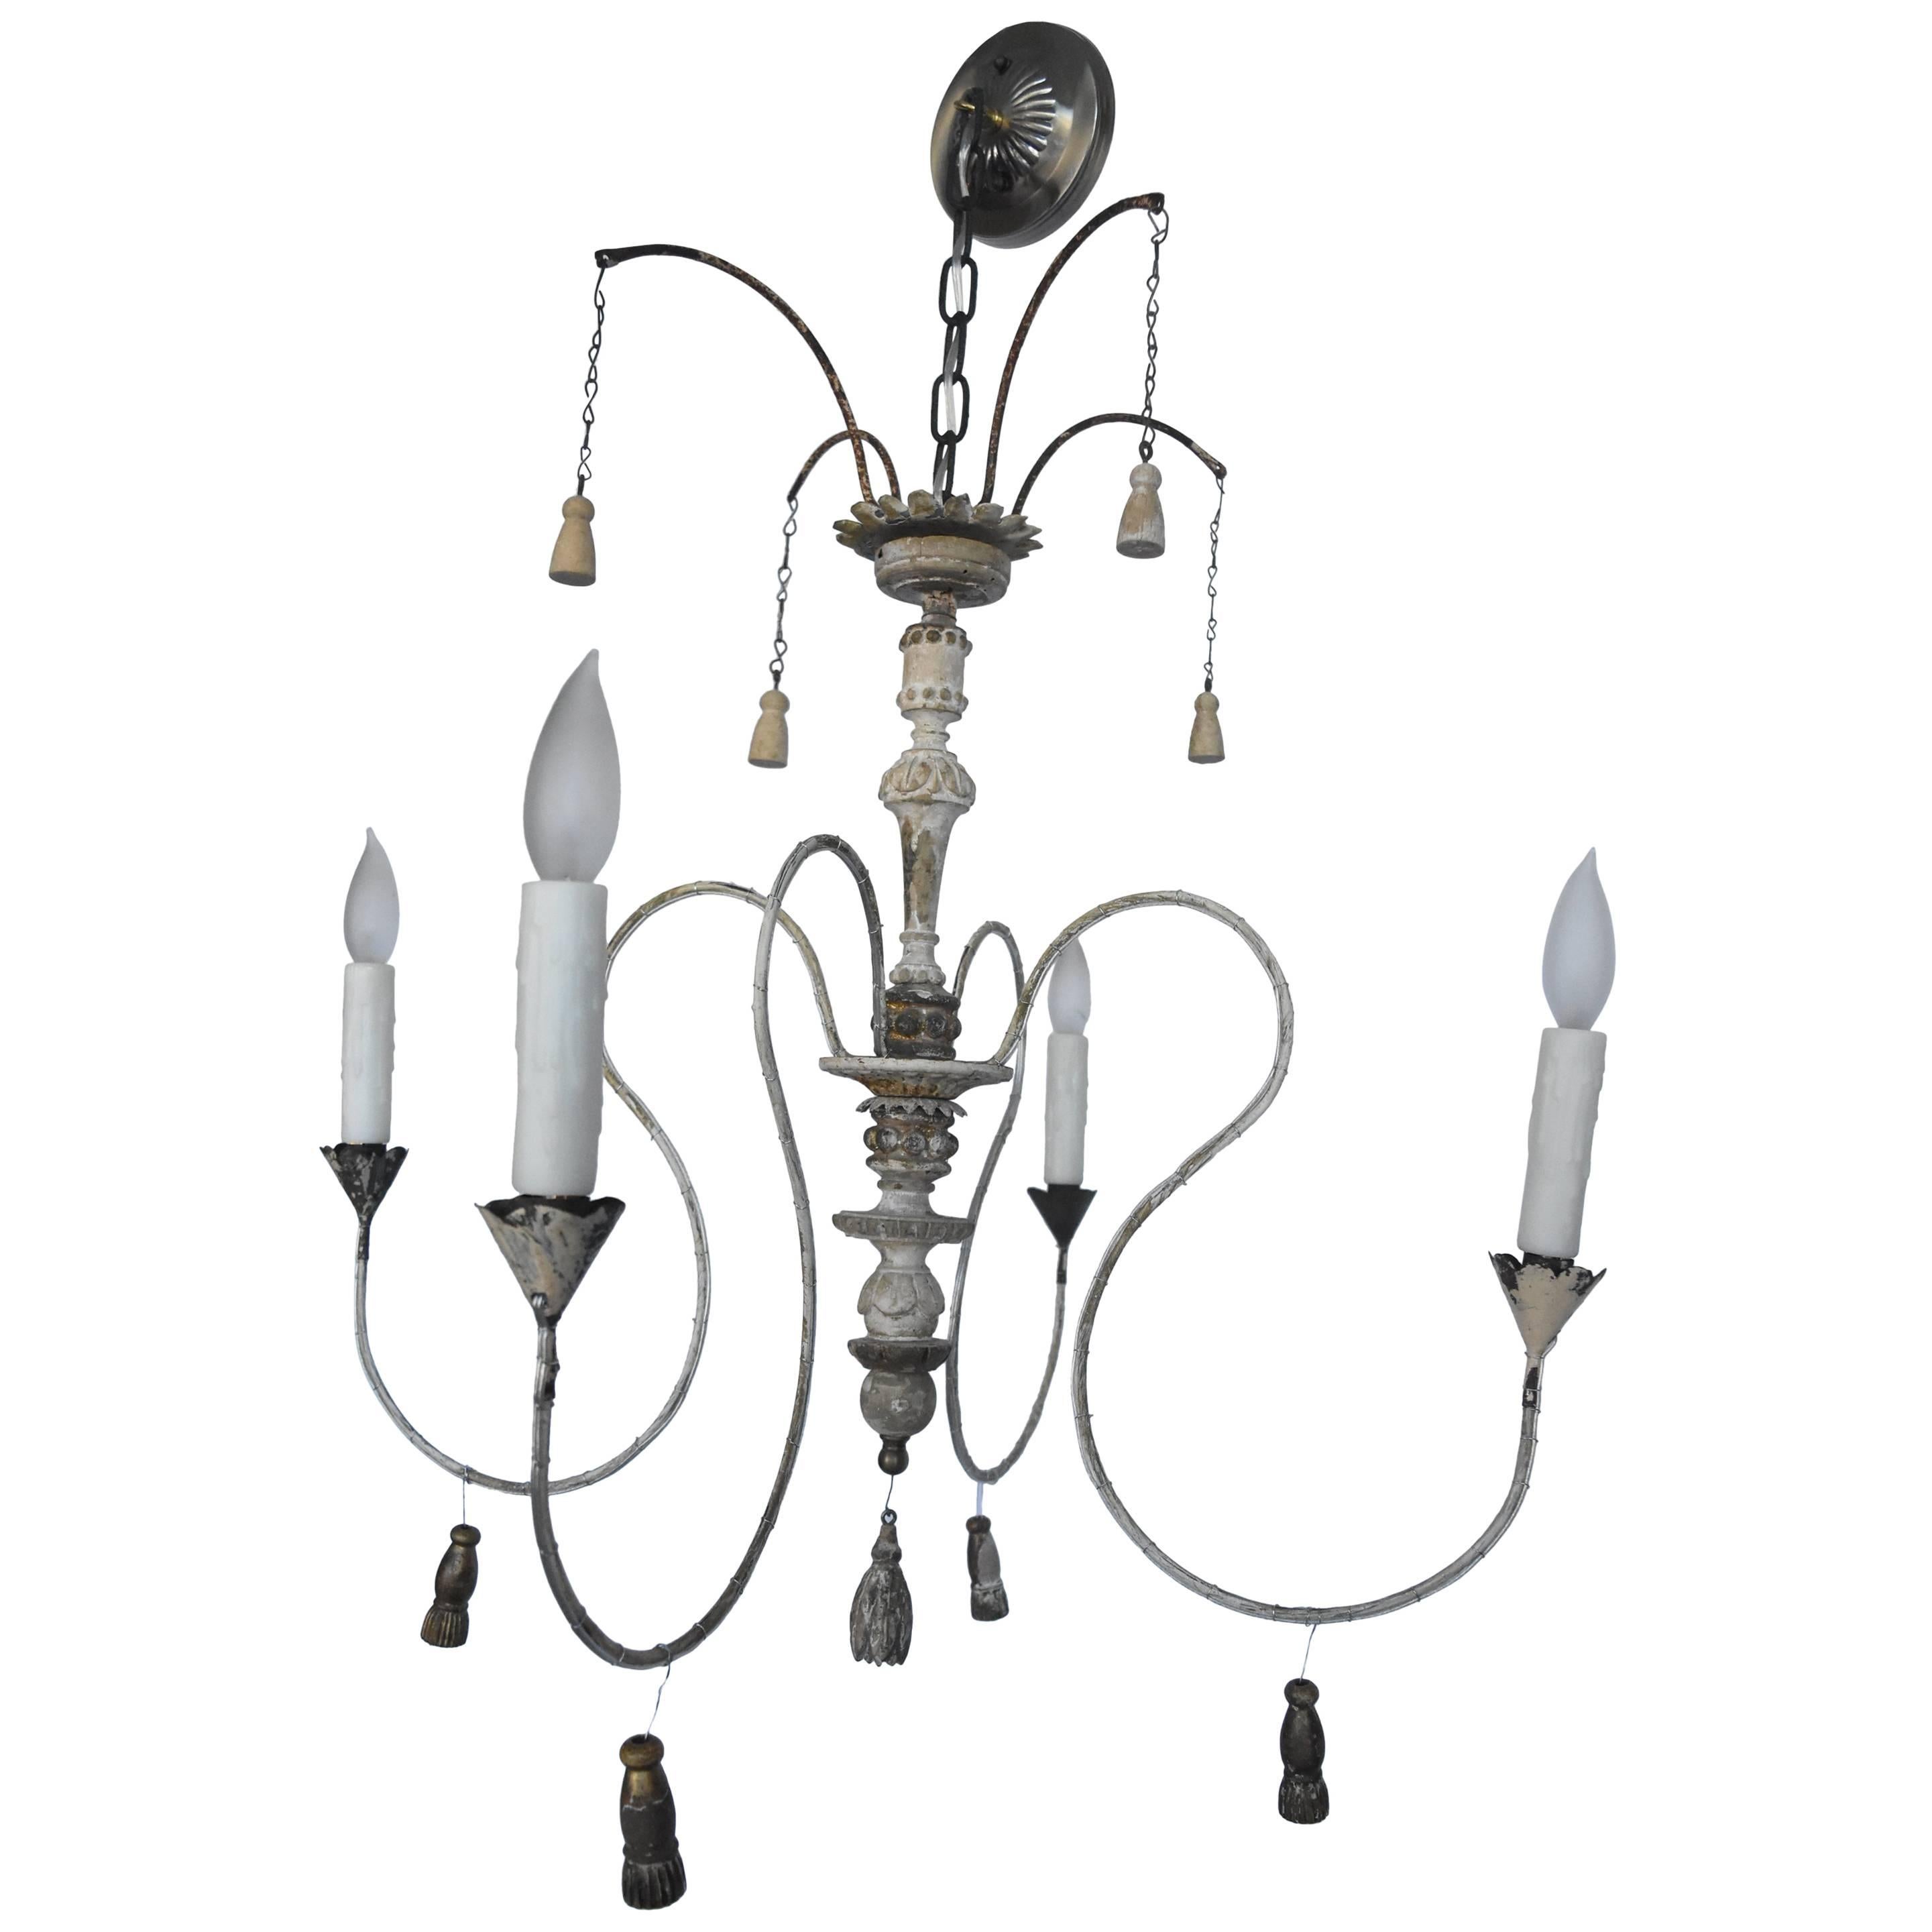 Italian Spider Chandelier Made from 18th, 19th Century Church Elements and Iron